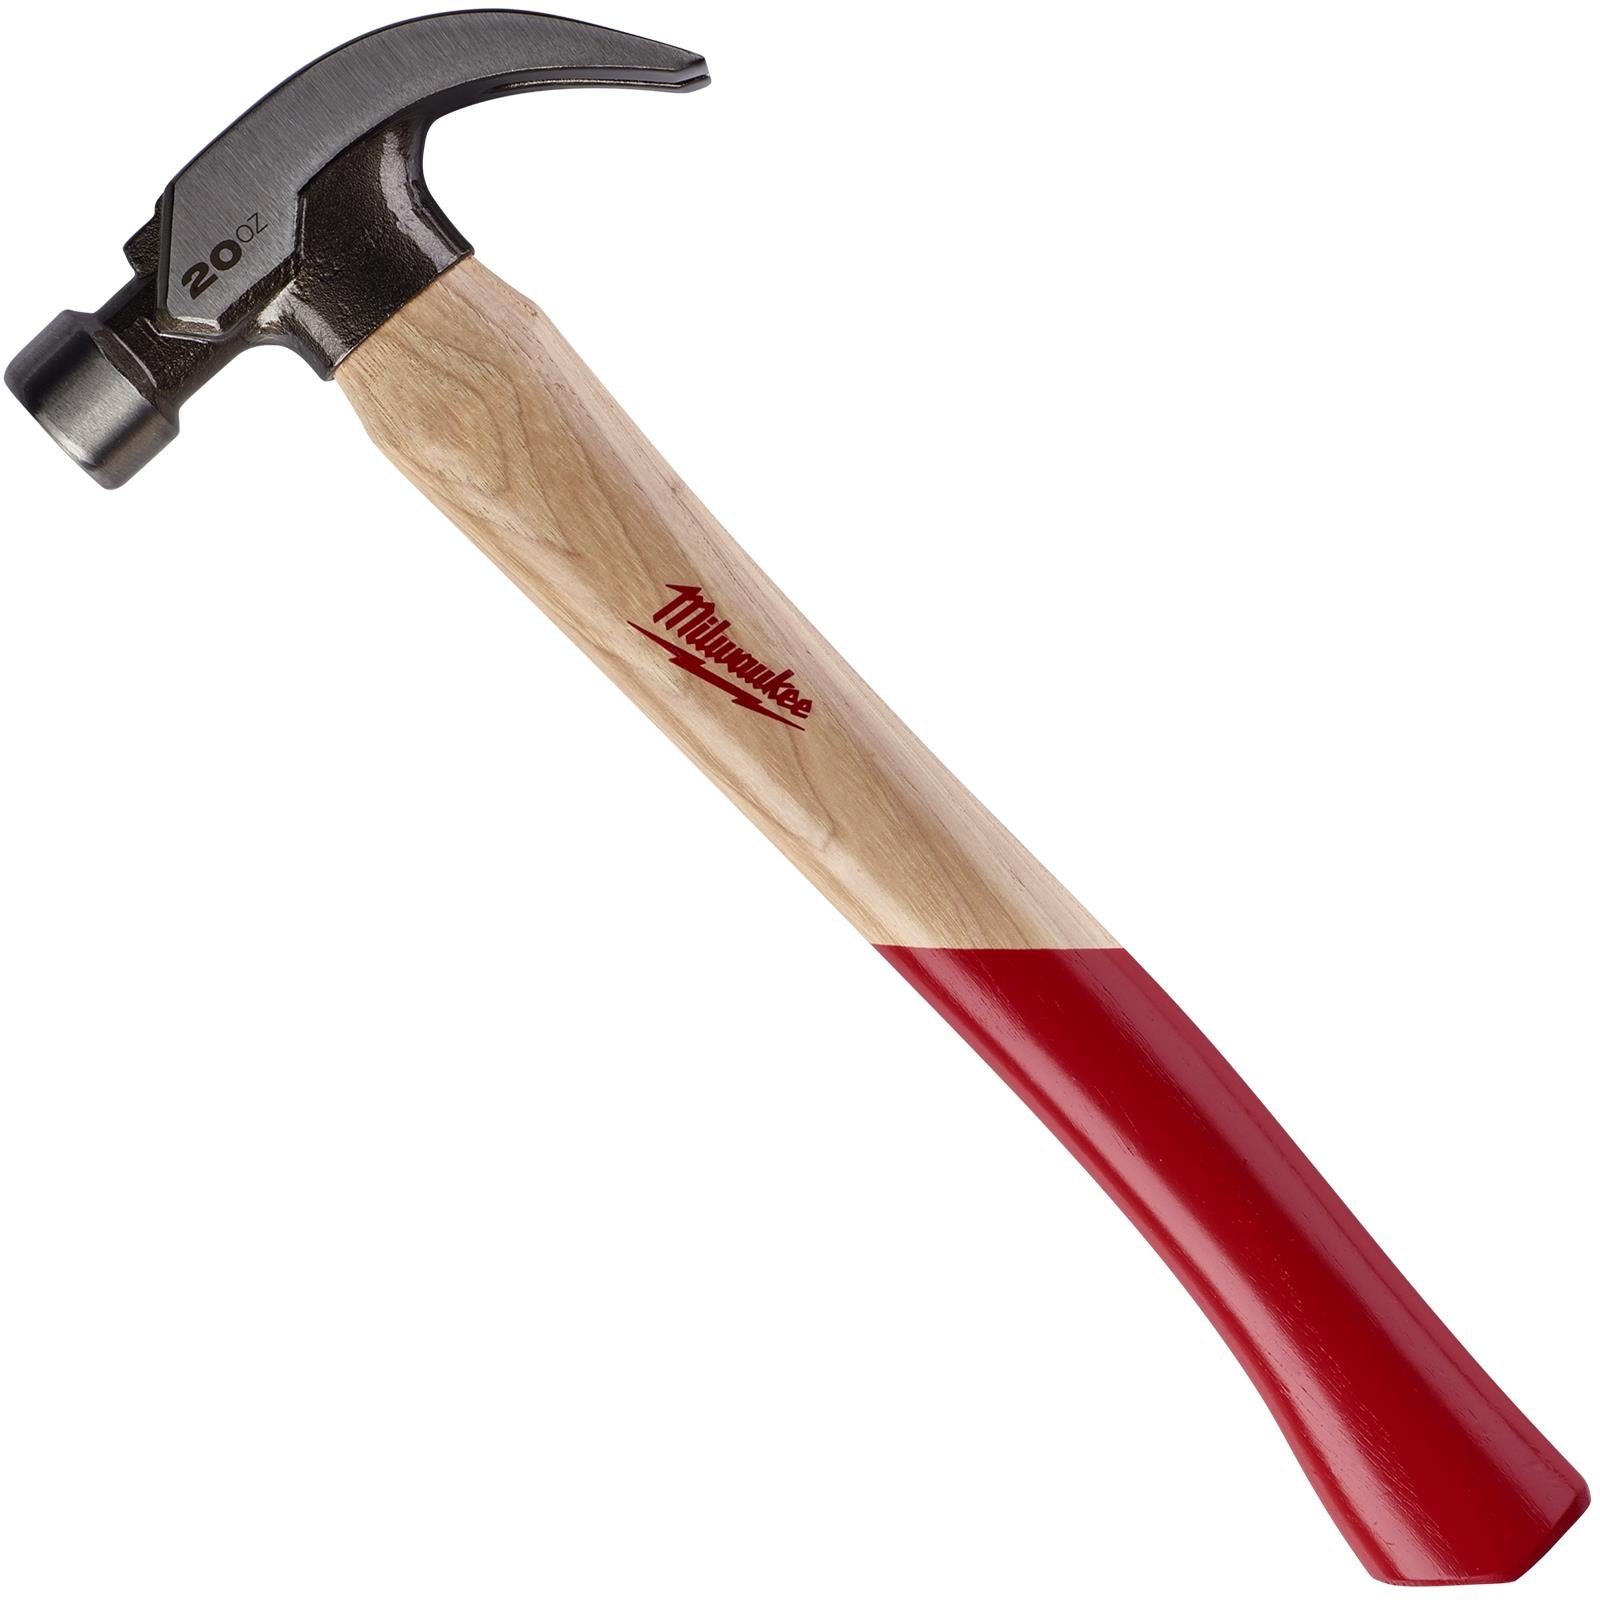 Milwaukee Curved Claw Hammer 20oz 570g with Hickory Wooden Shaft